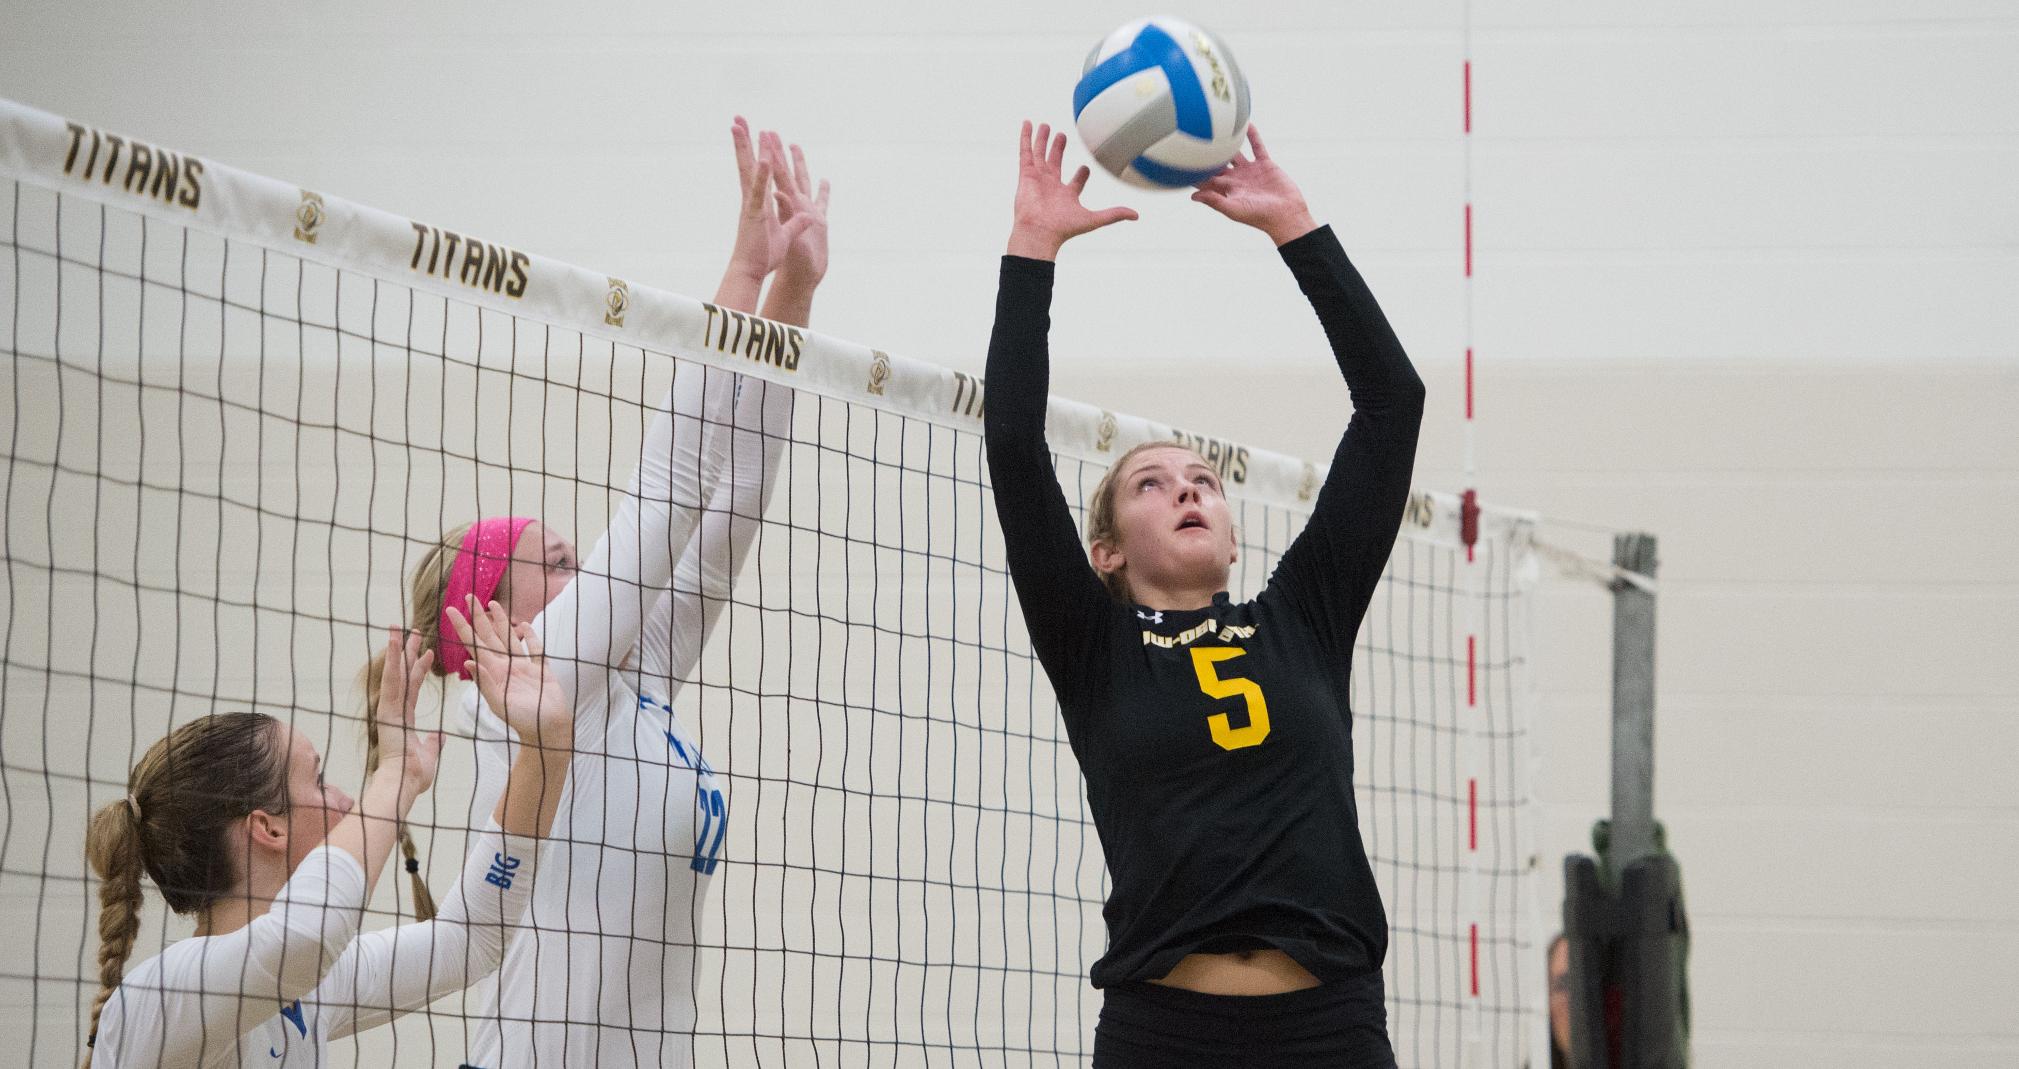 Lexi Thiel had 40 assists and 13 digs in UW-Oshkosh's five-set victory over 22nd-ranked Millikin University.